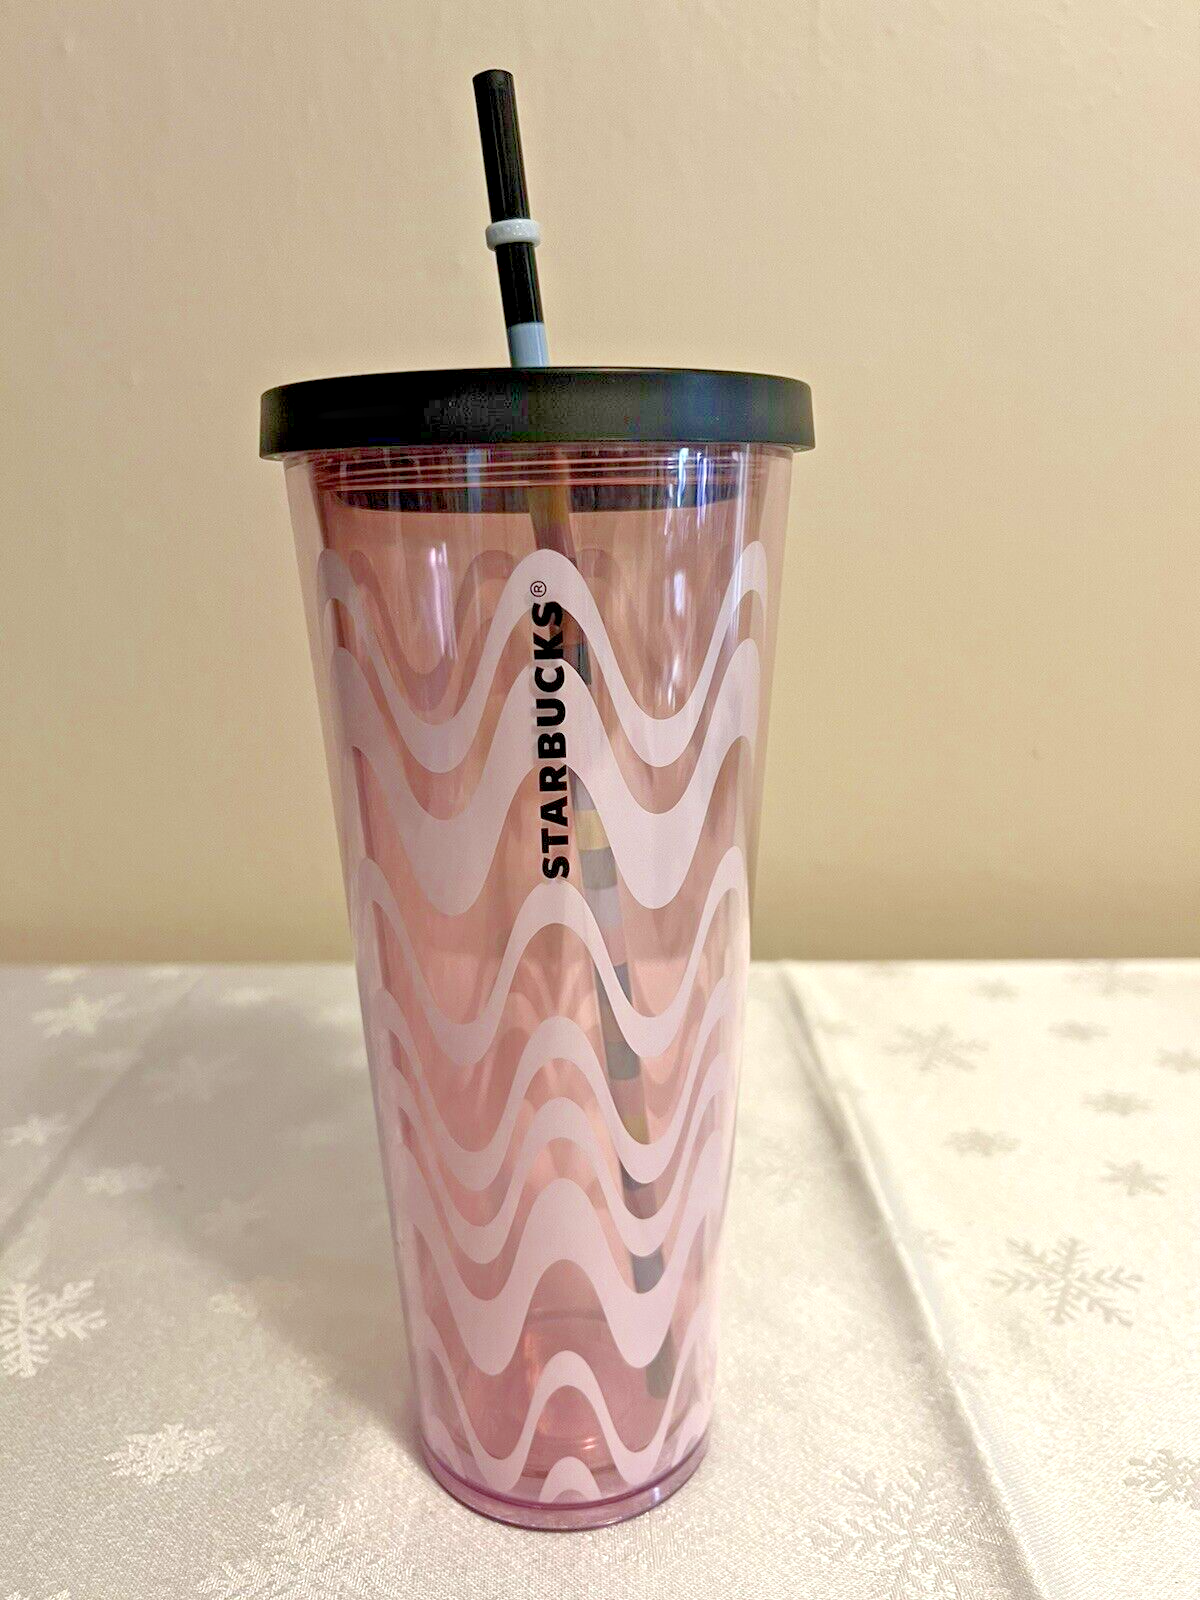 STARBUCKS Pink Wavy Lines Abstract Print Cold Cup Acrylic TUMBLER 24 oz Summer - $13.86